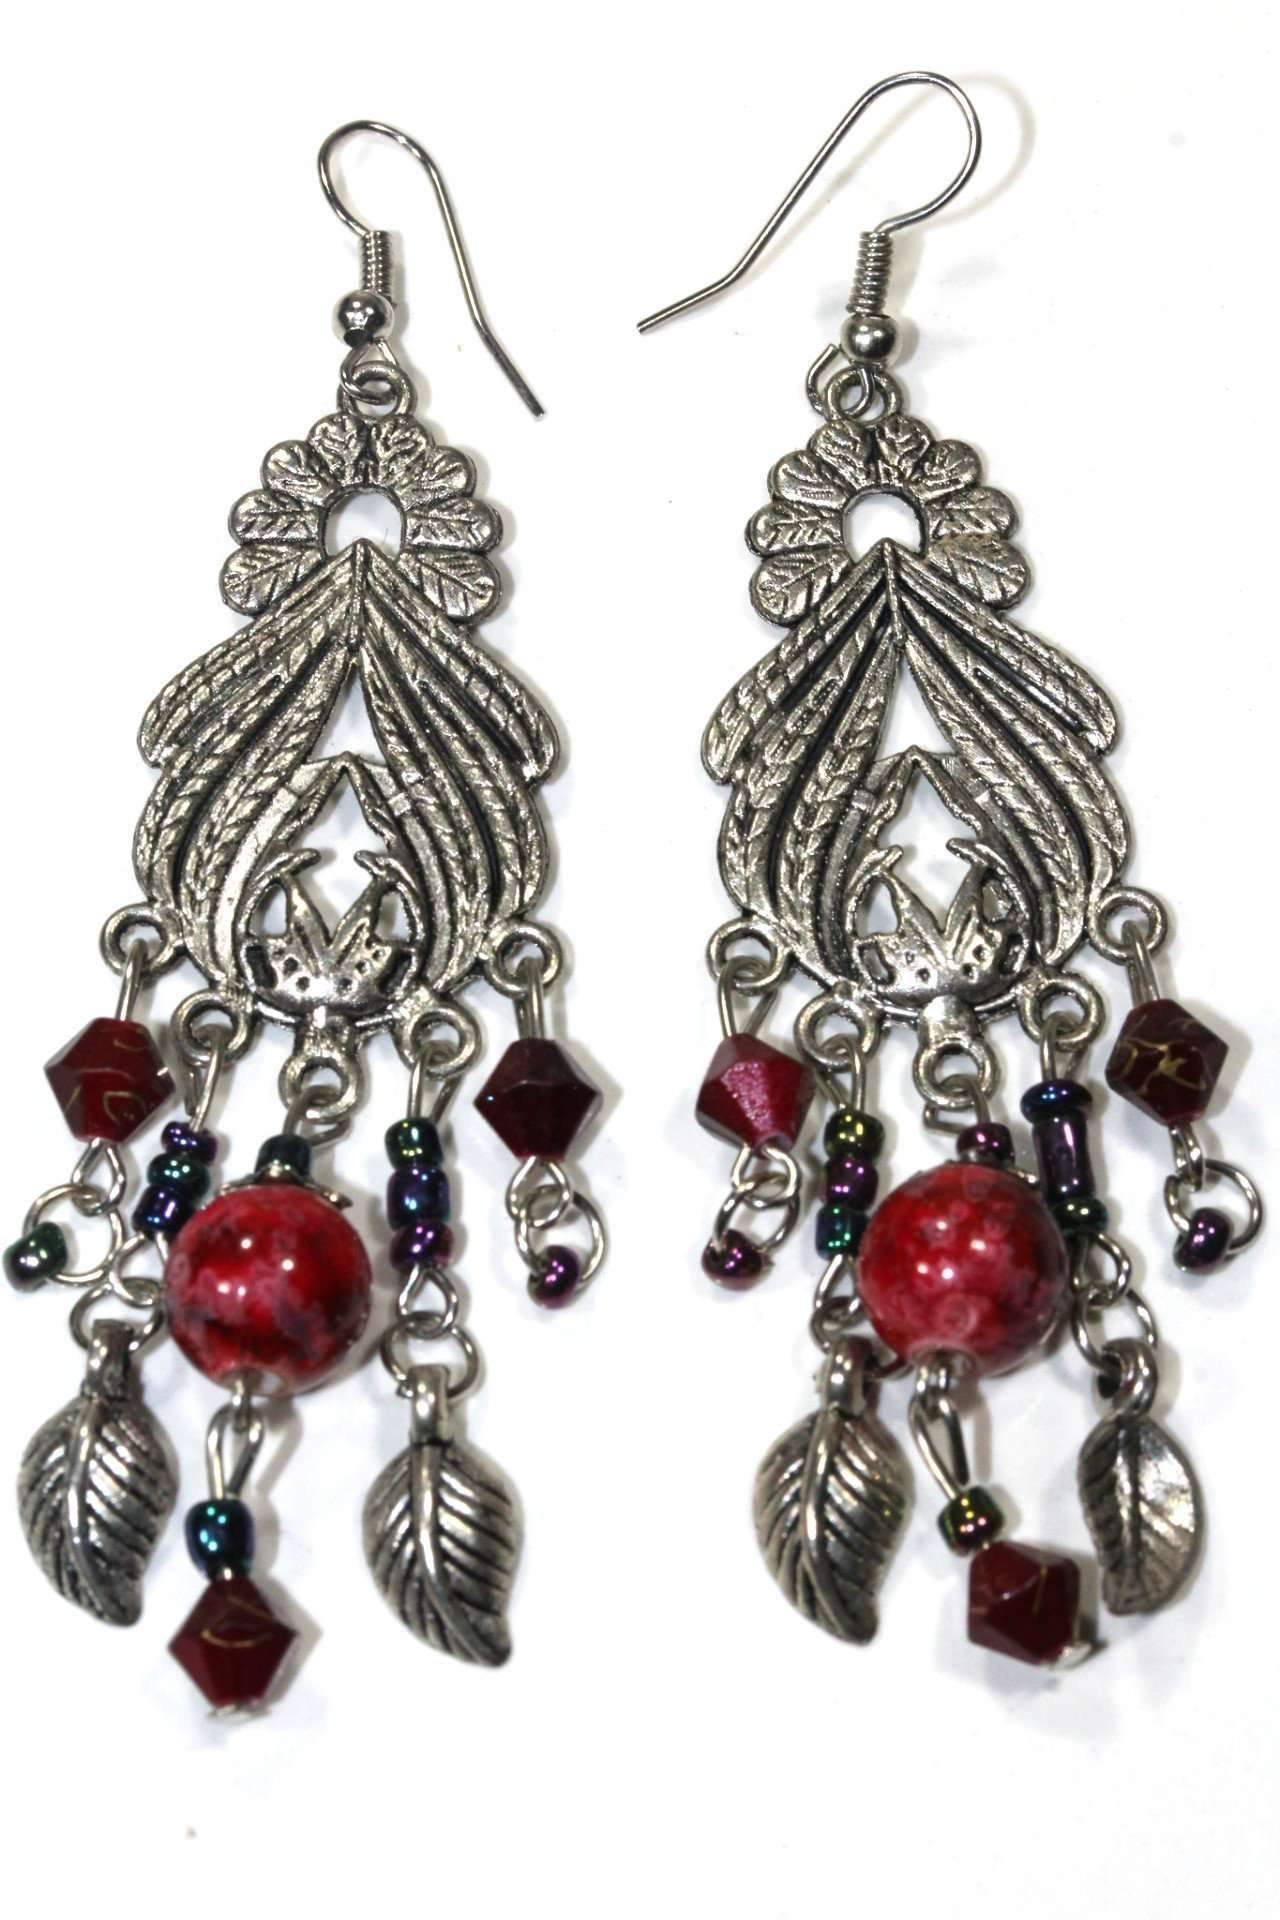 Marbled Bead Bohemian Earrings with Leaf Charms - 2 Colors Available - Earrings - Bijou Her -  -  - 